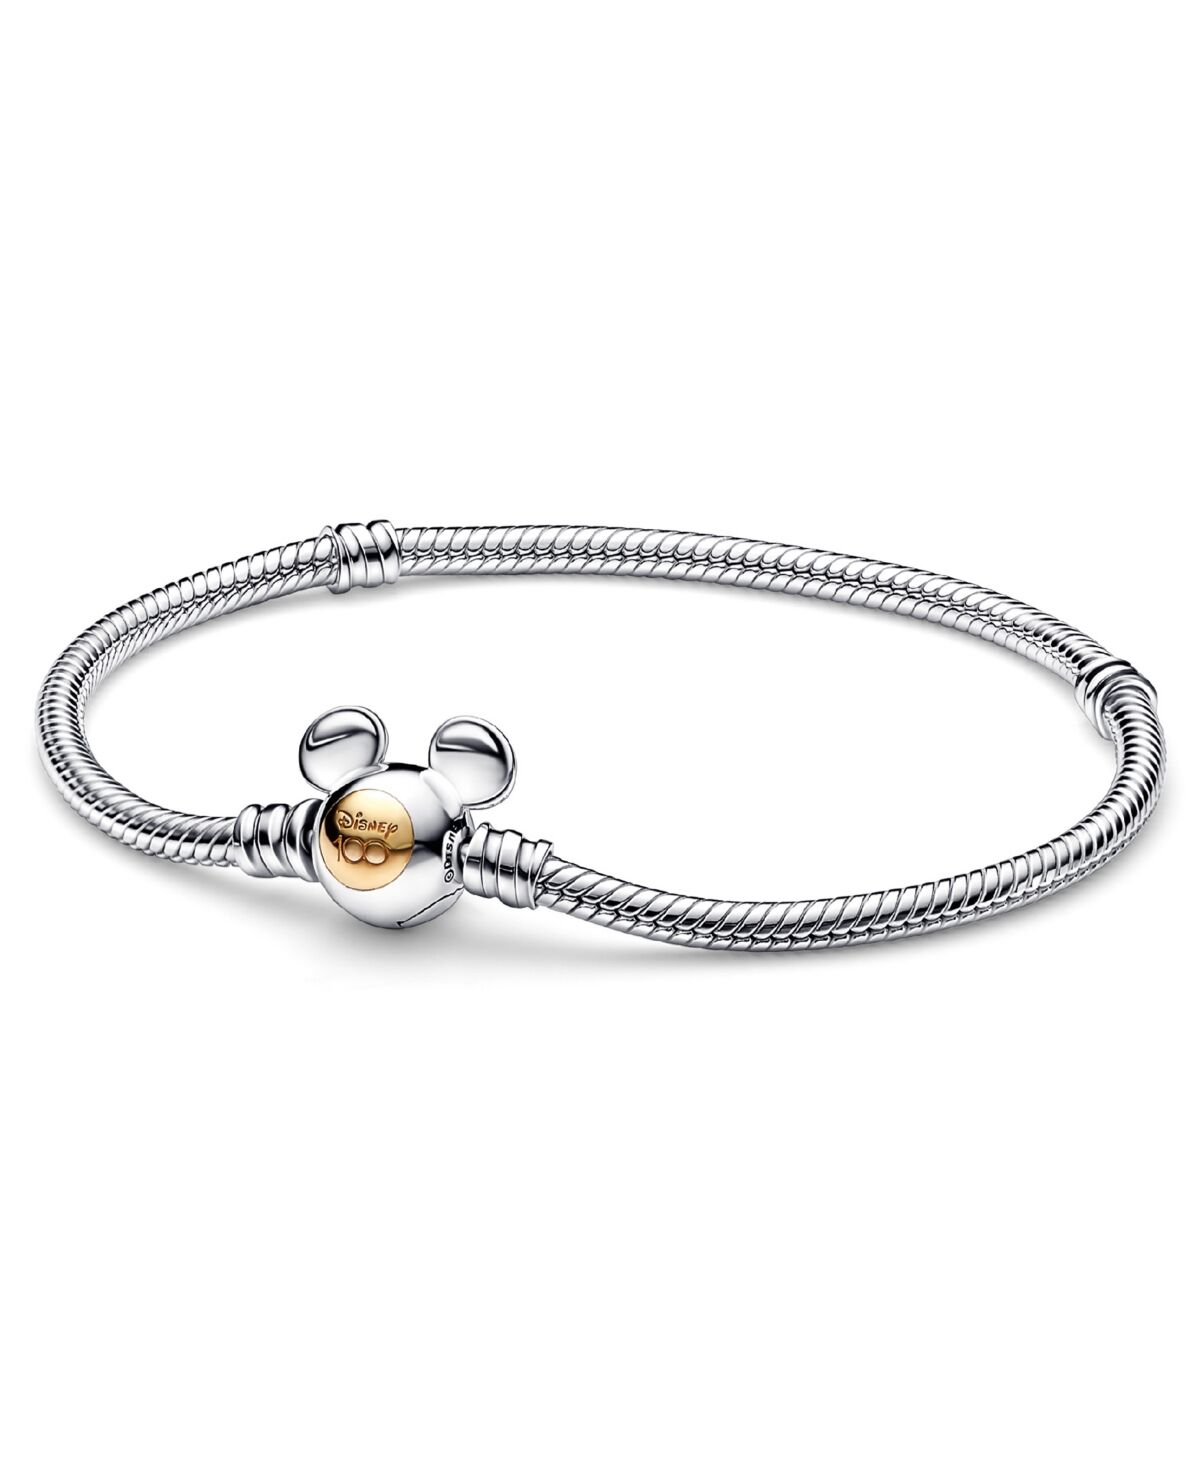 Pandora Moments Sterling Silver and 14K Gold-Plated Disney 100th Anniversary Snake Chain Bracelet - Mixed